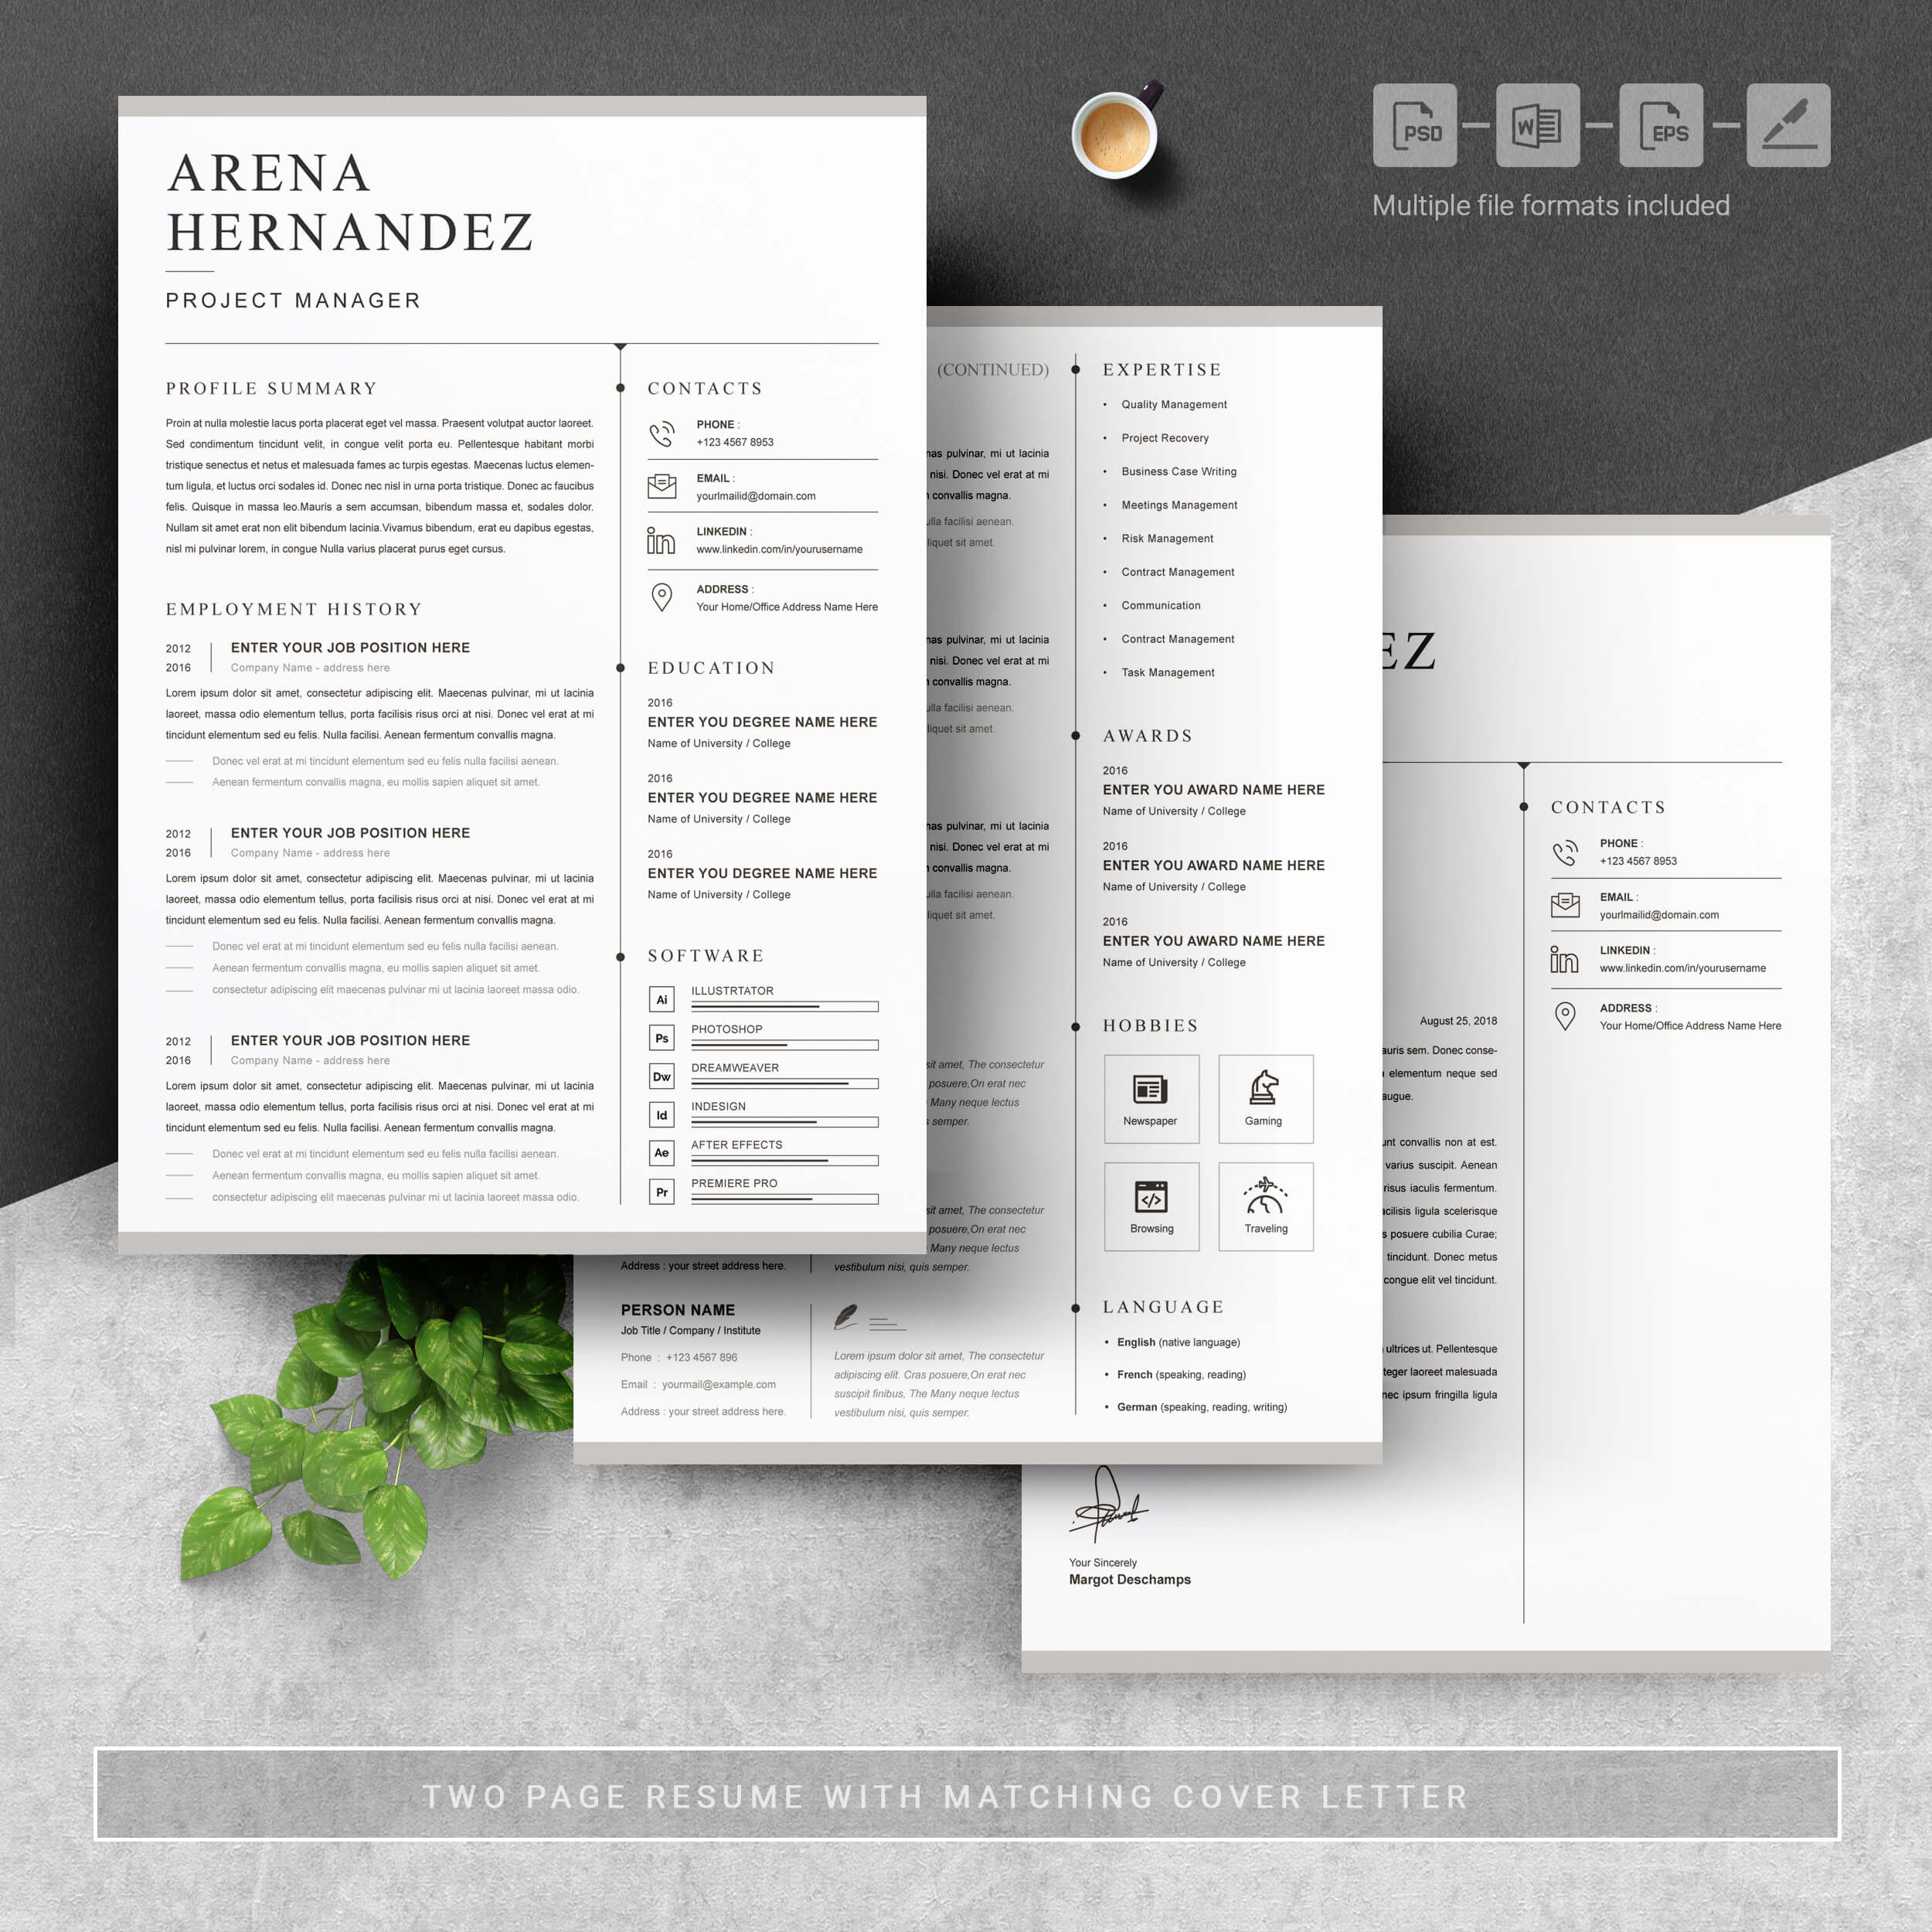 04 3 pages free resume design template 635